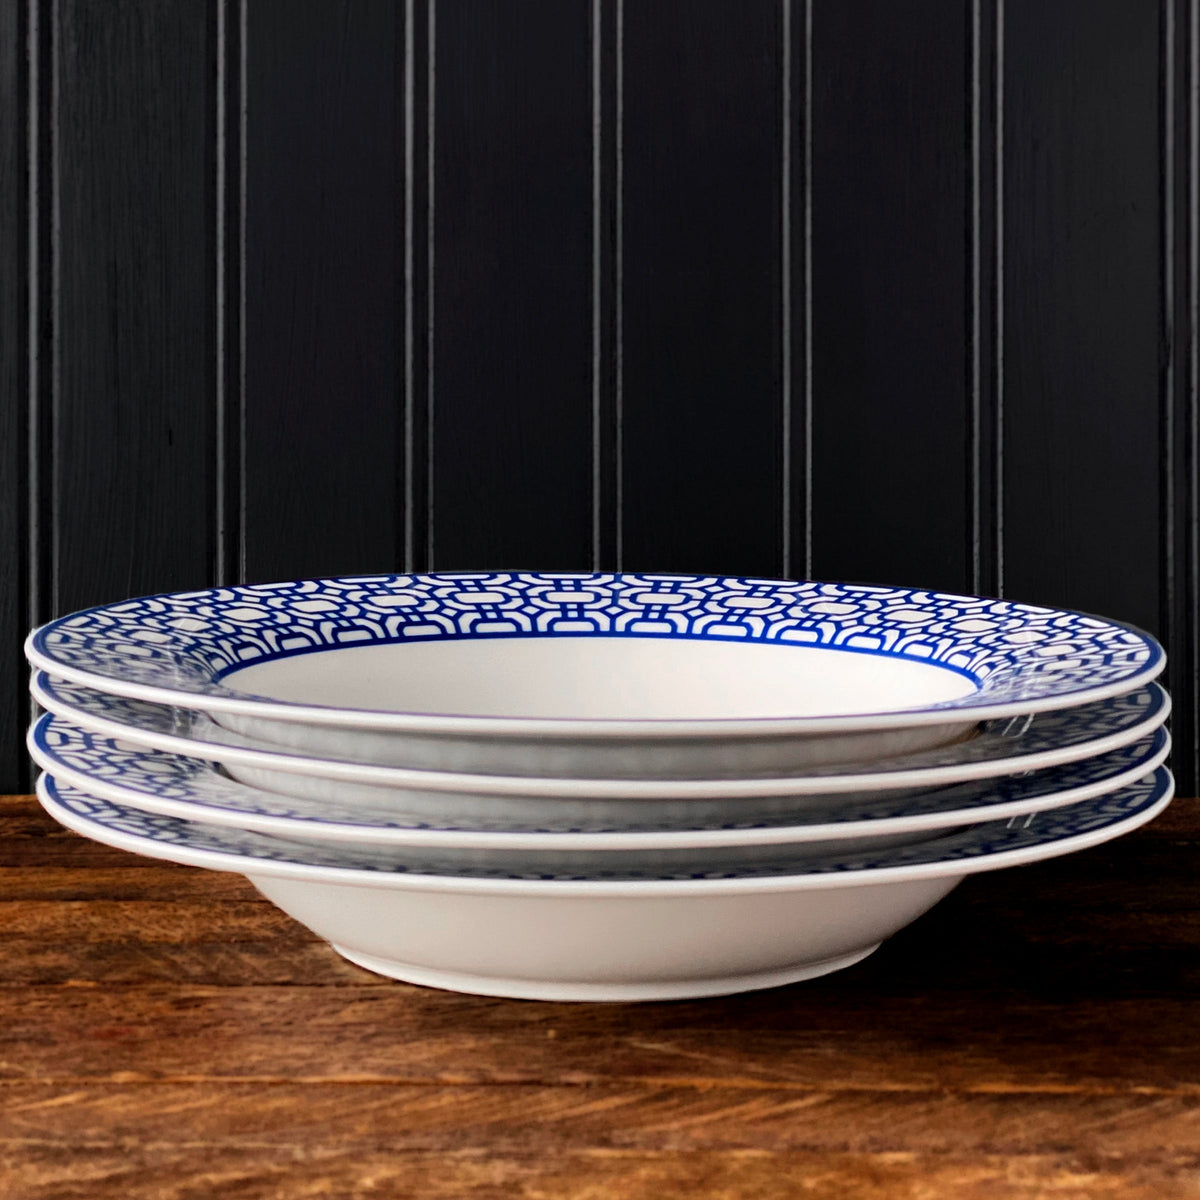 A set of Newport Garden Gate Rimmed Soup Bowls in blue and white, by Caskata Artisanal Home, on a wooden table.